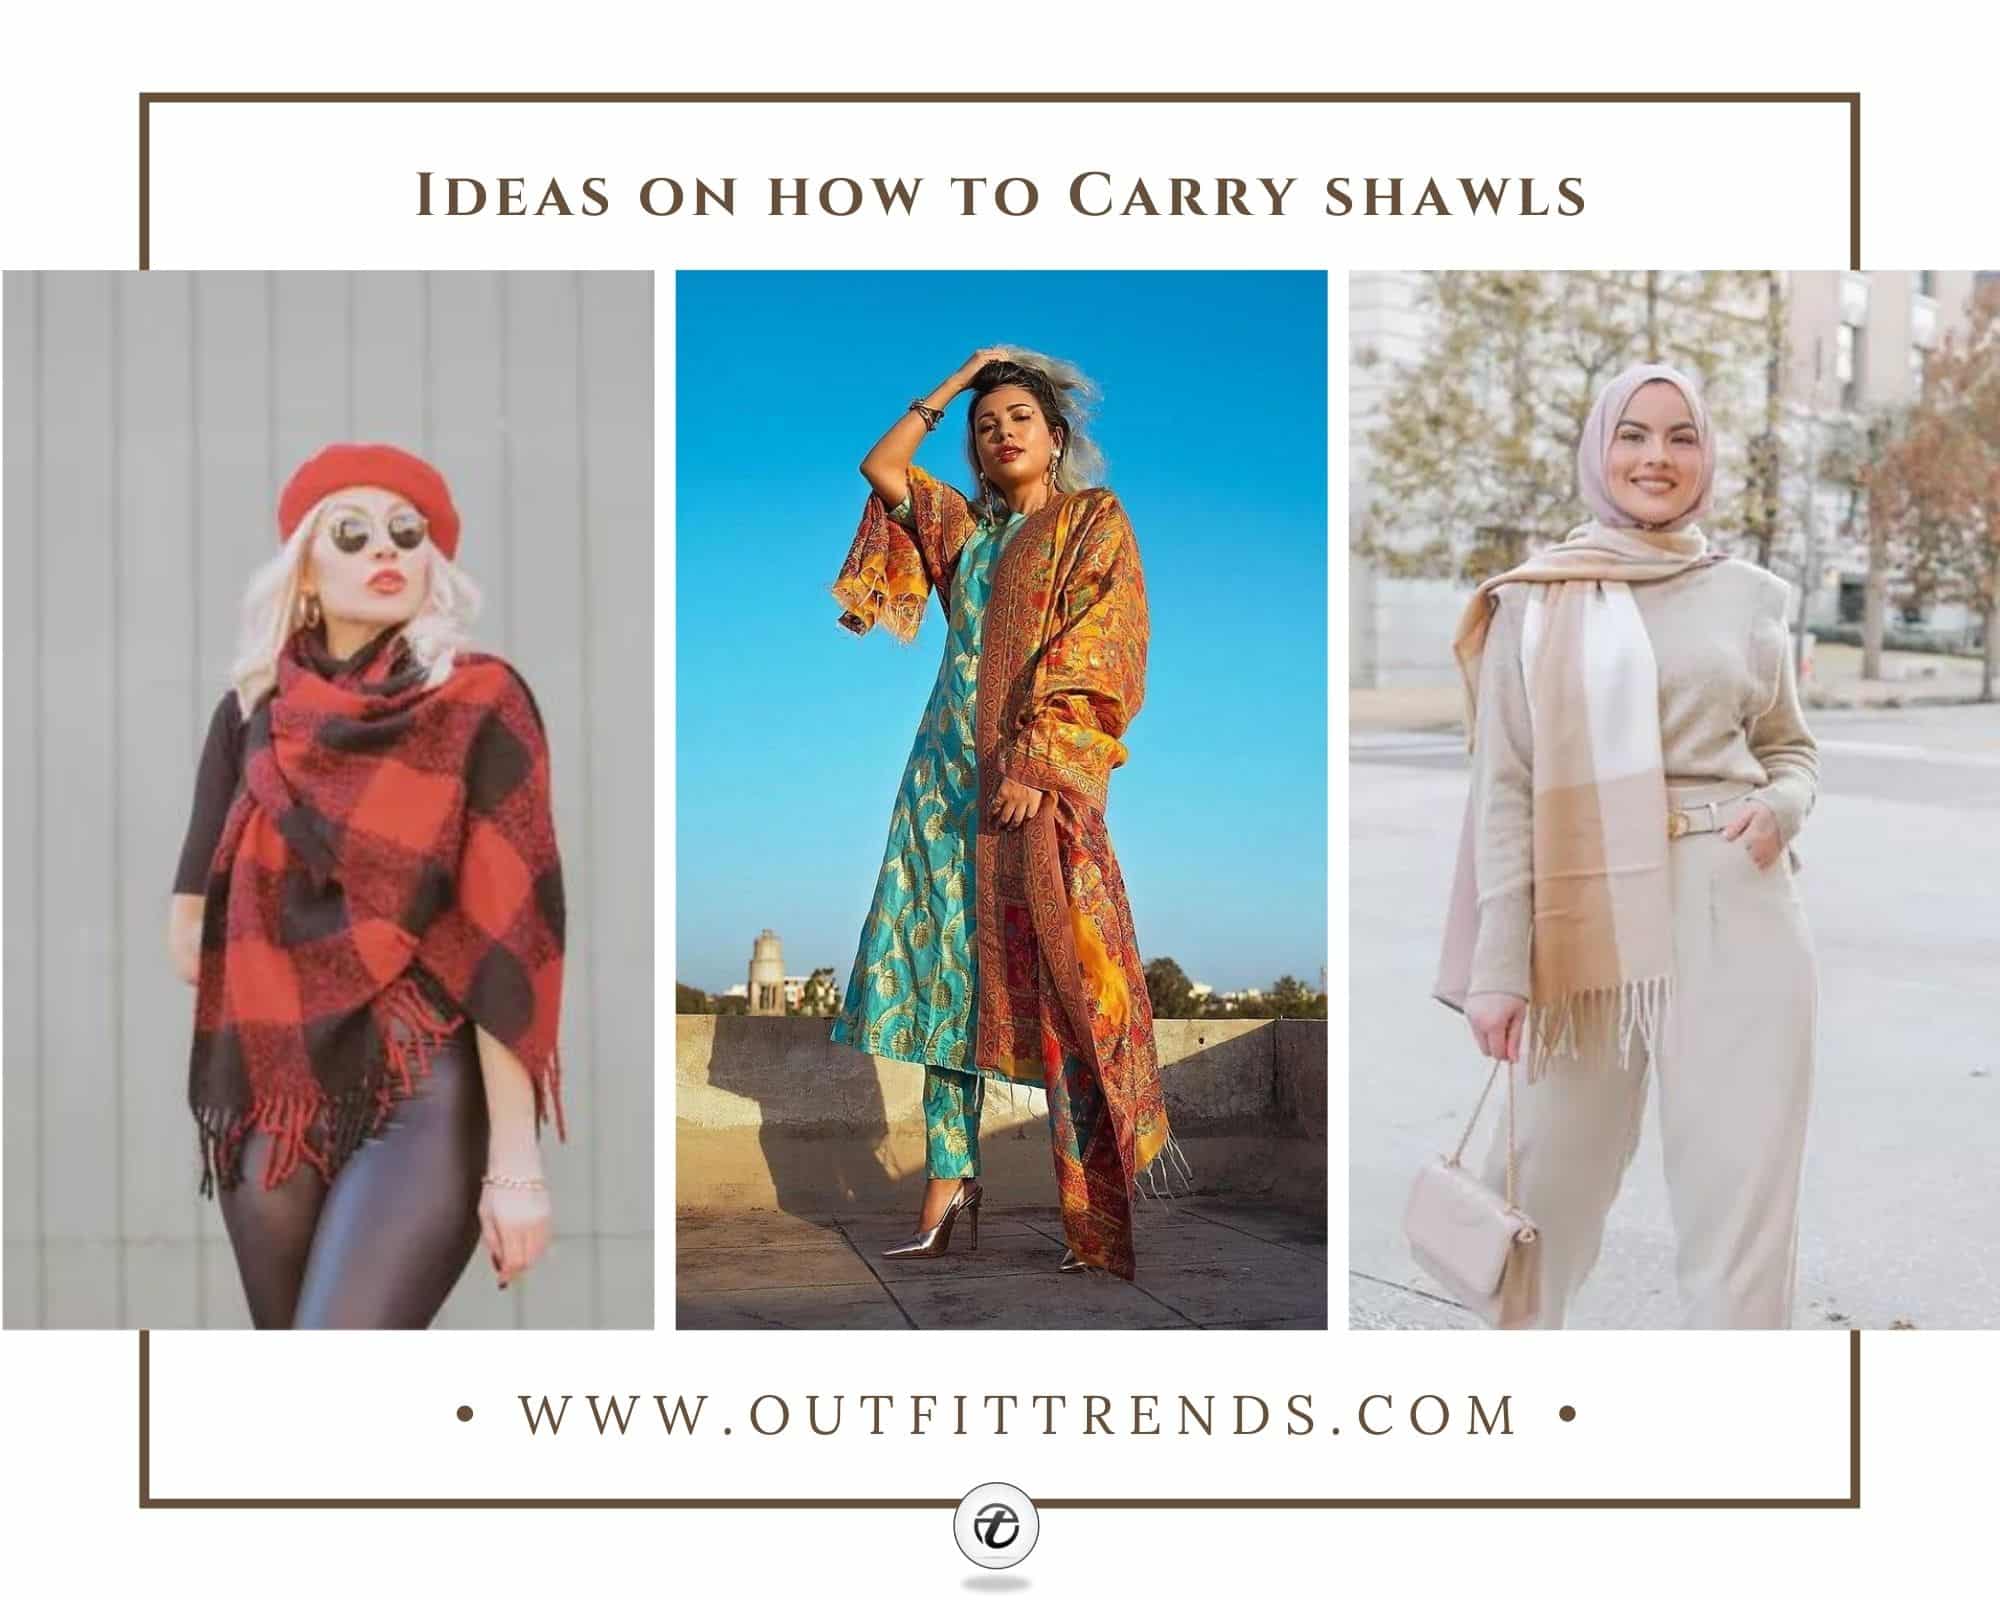 How To Wear The Oversized Scarf Trend, Huge Scarf Outfit Ideas - Just The  Design